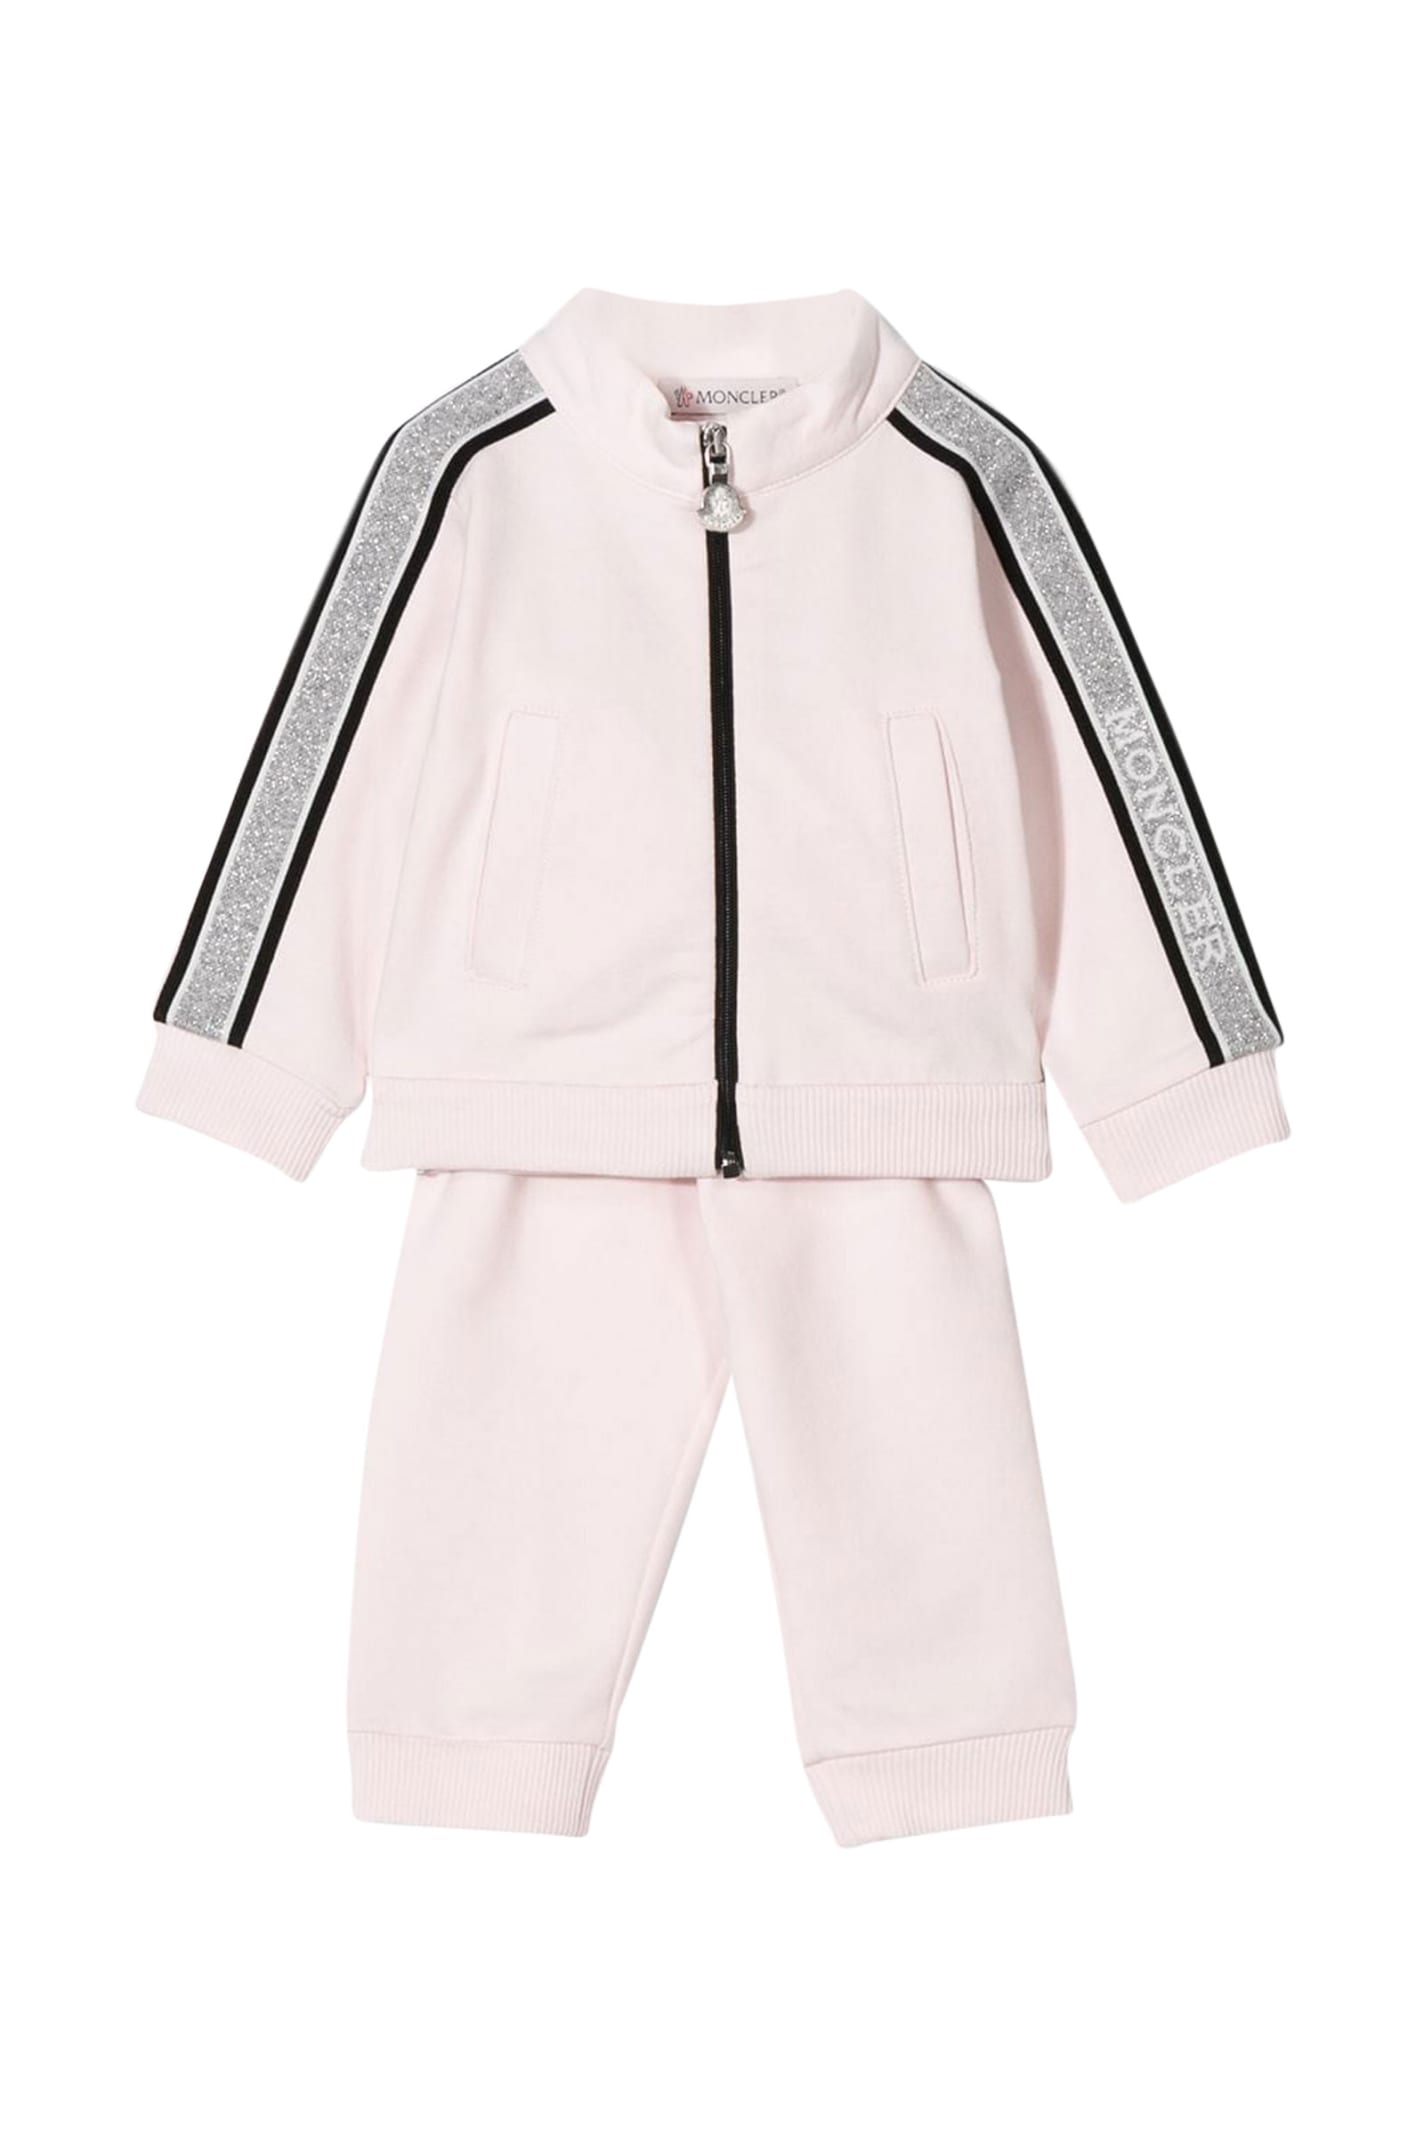 MONCLER SIDE BAND SPORTSUIT,11263839